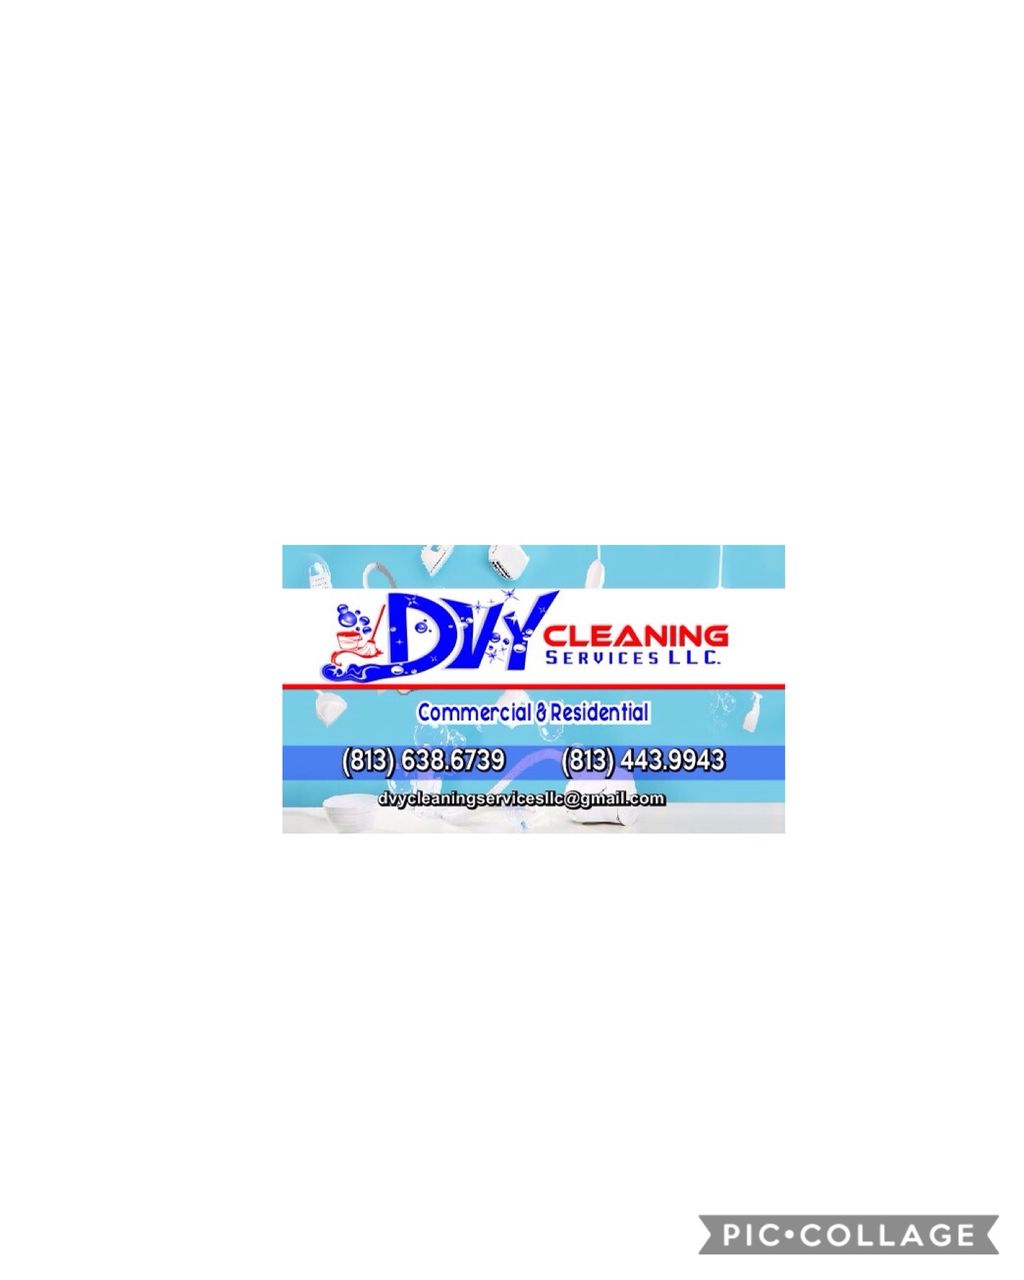 DVY Cleaning Services LLC